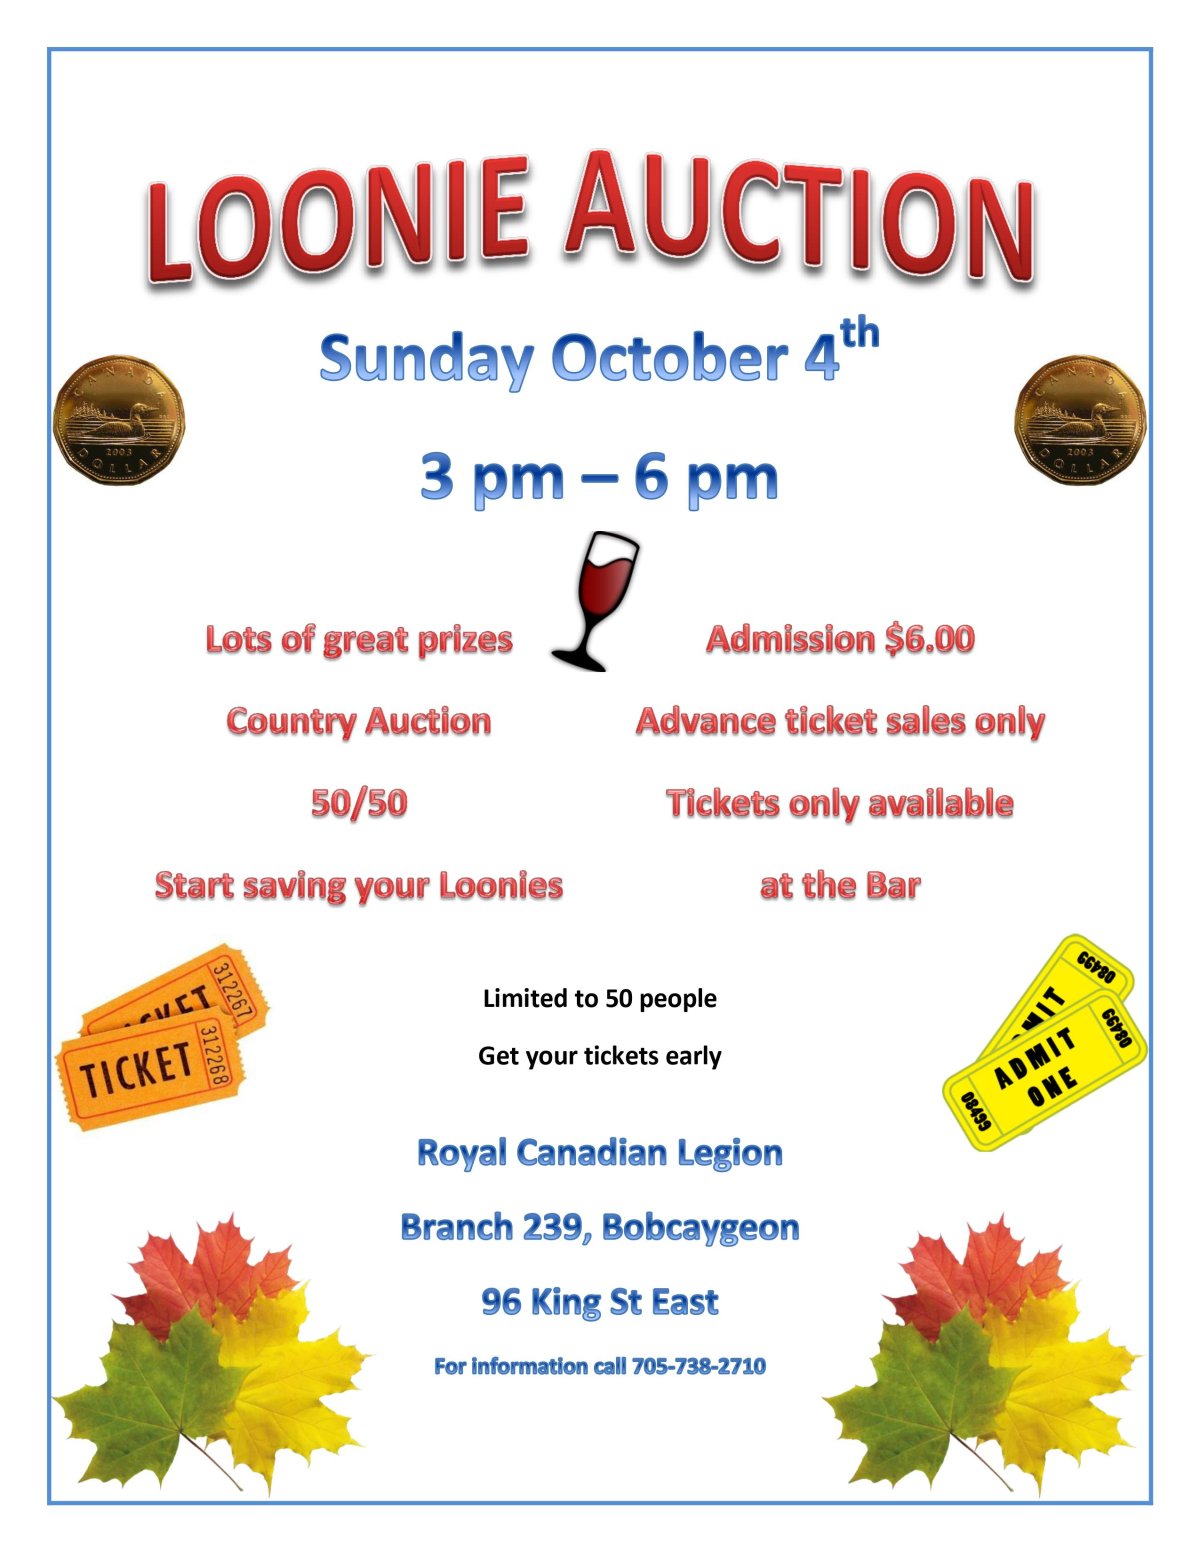 Loonie Auction - image